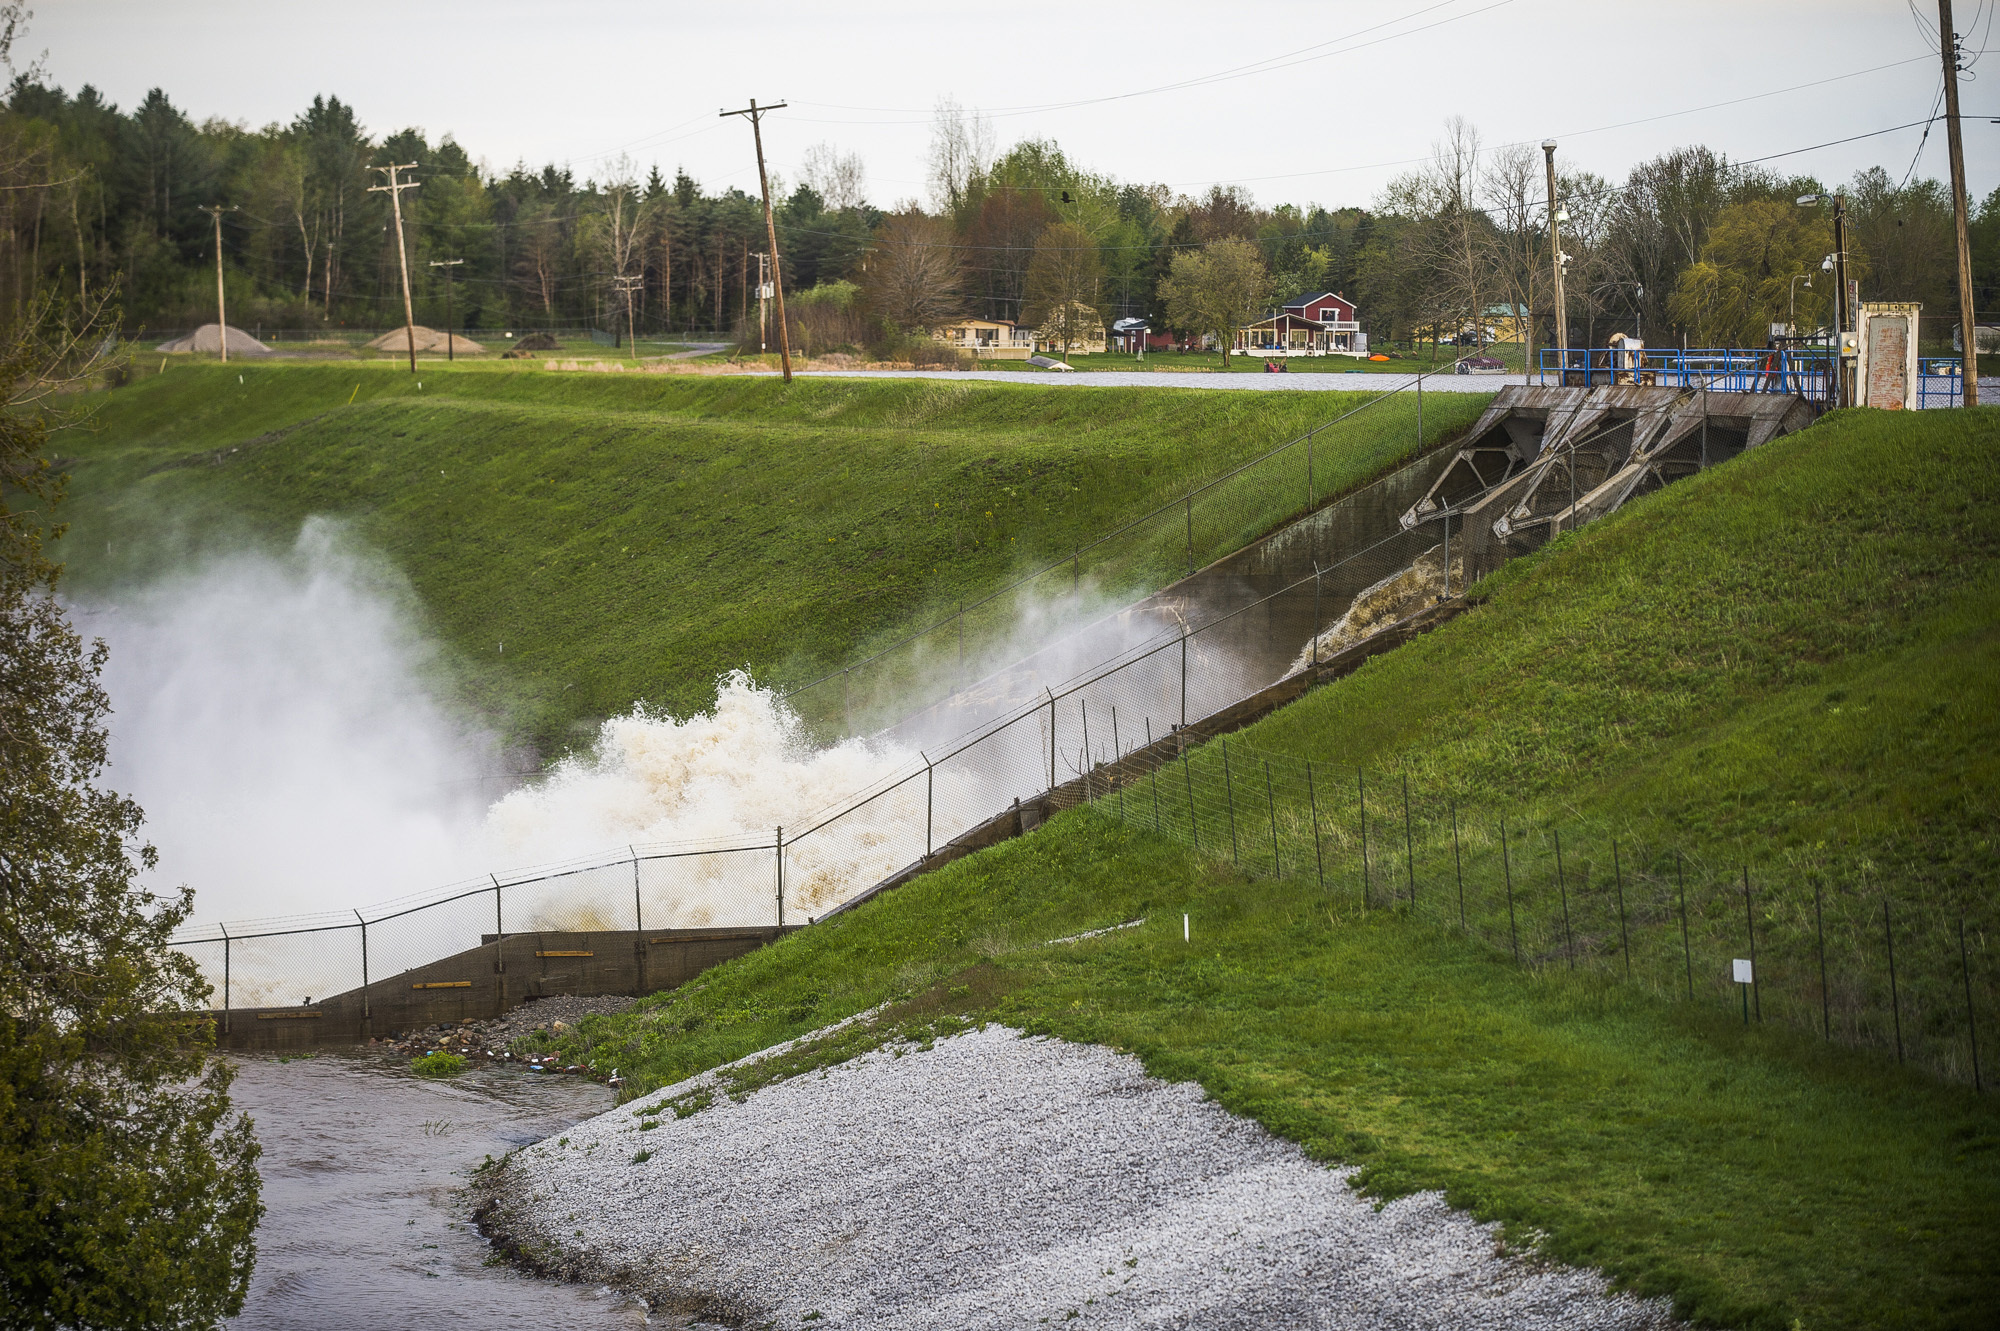 Carroll County's Cascade Lake drained after dam concerns